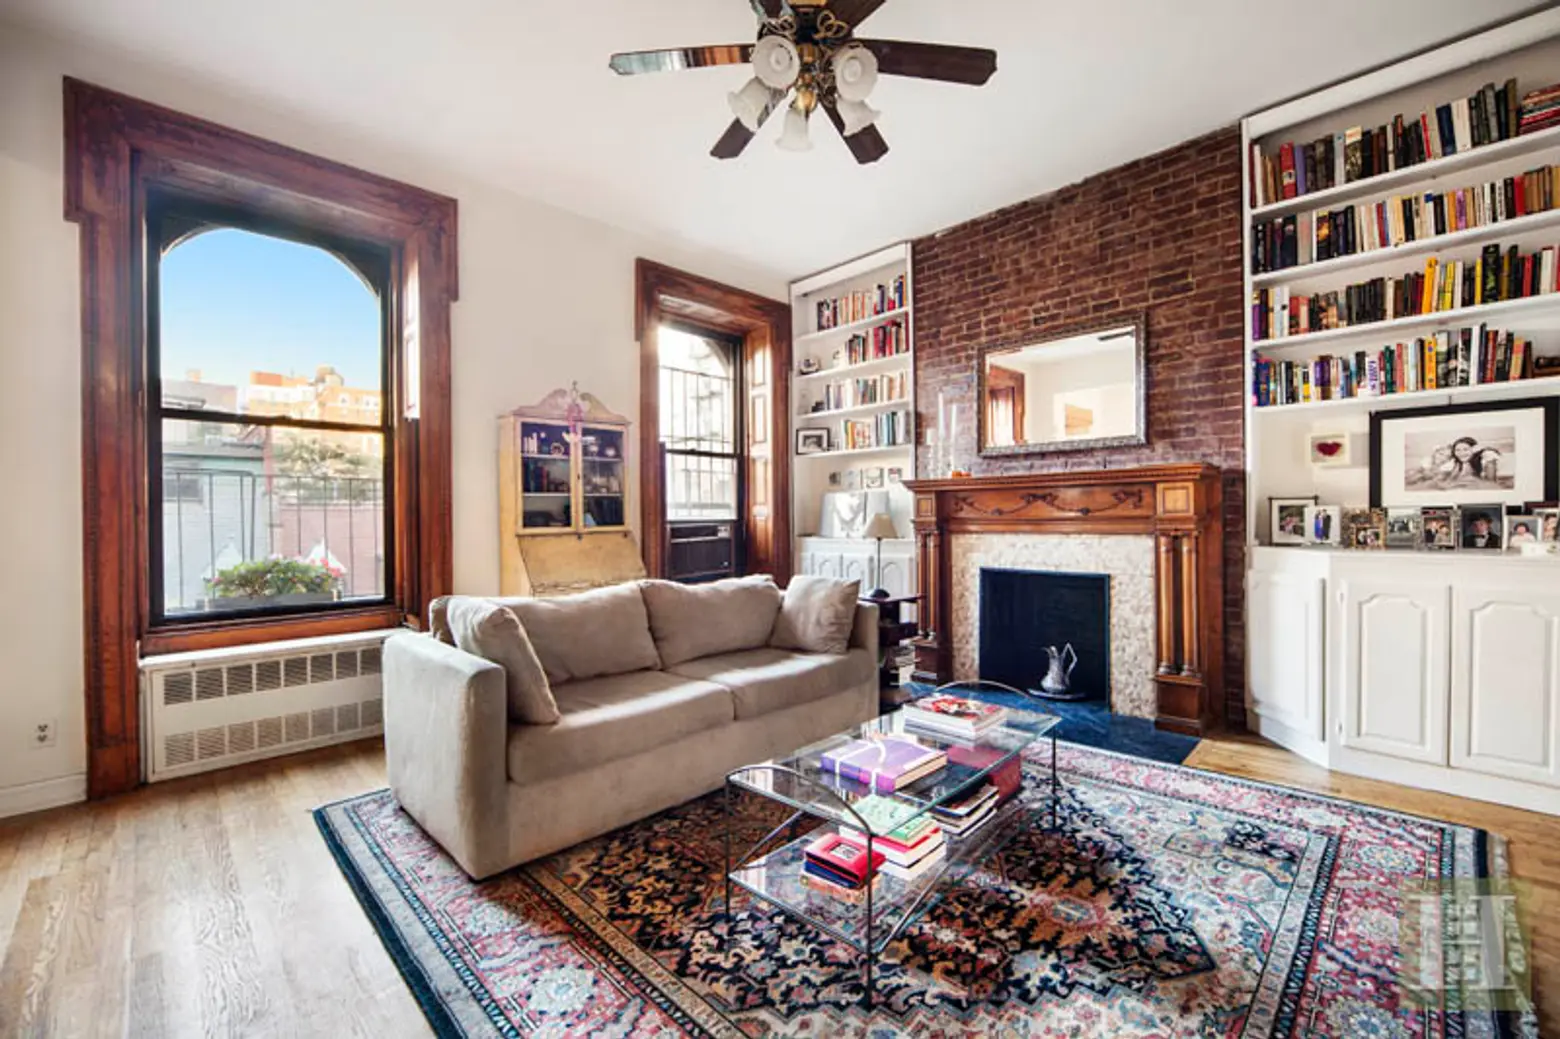 Adorable Upper West Side Co-op Charms with Old-World Touches